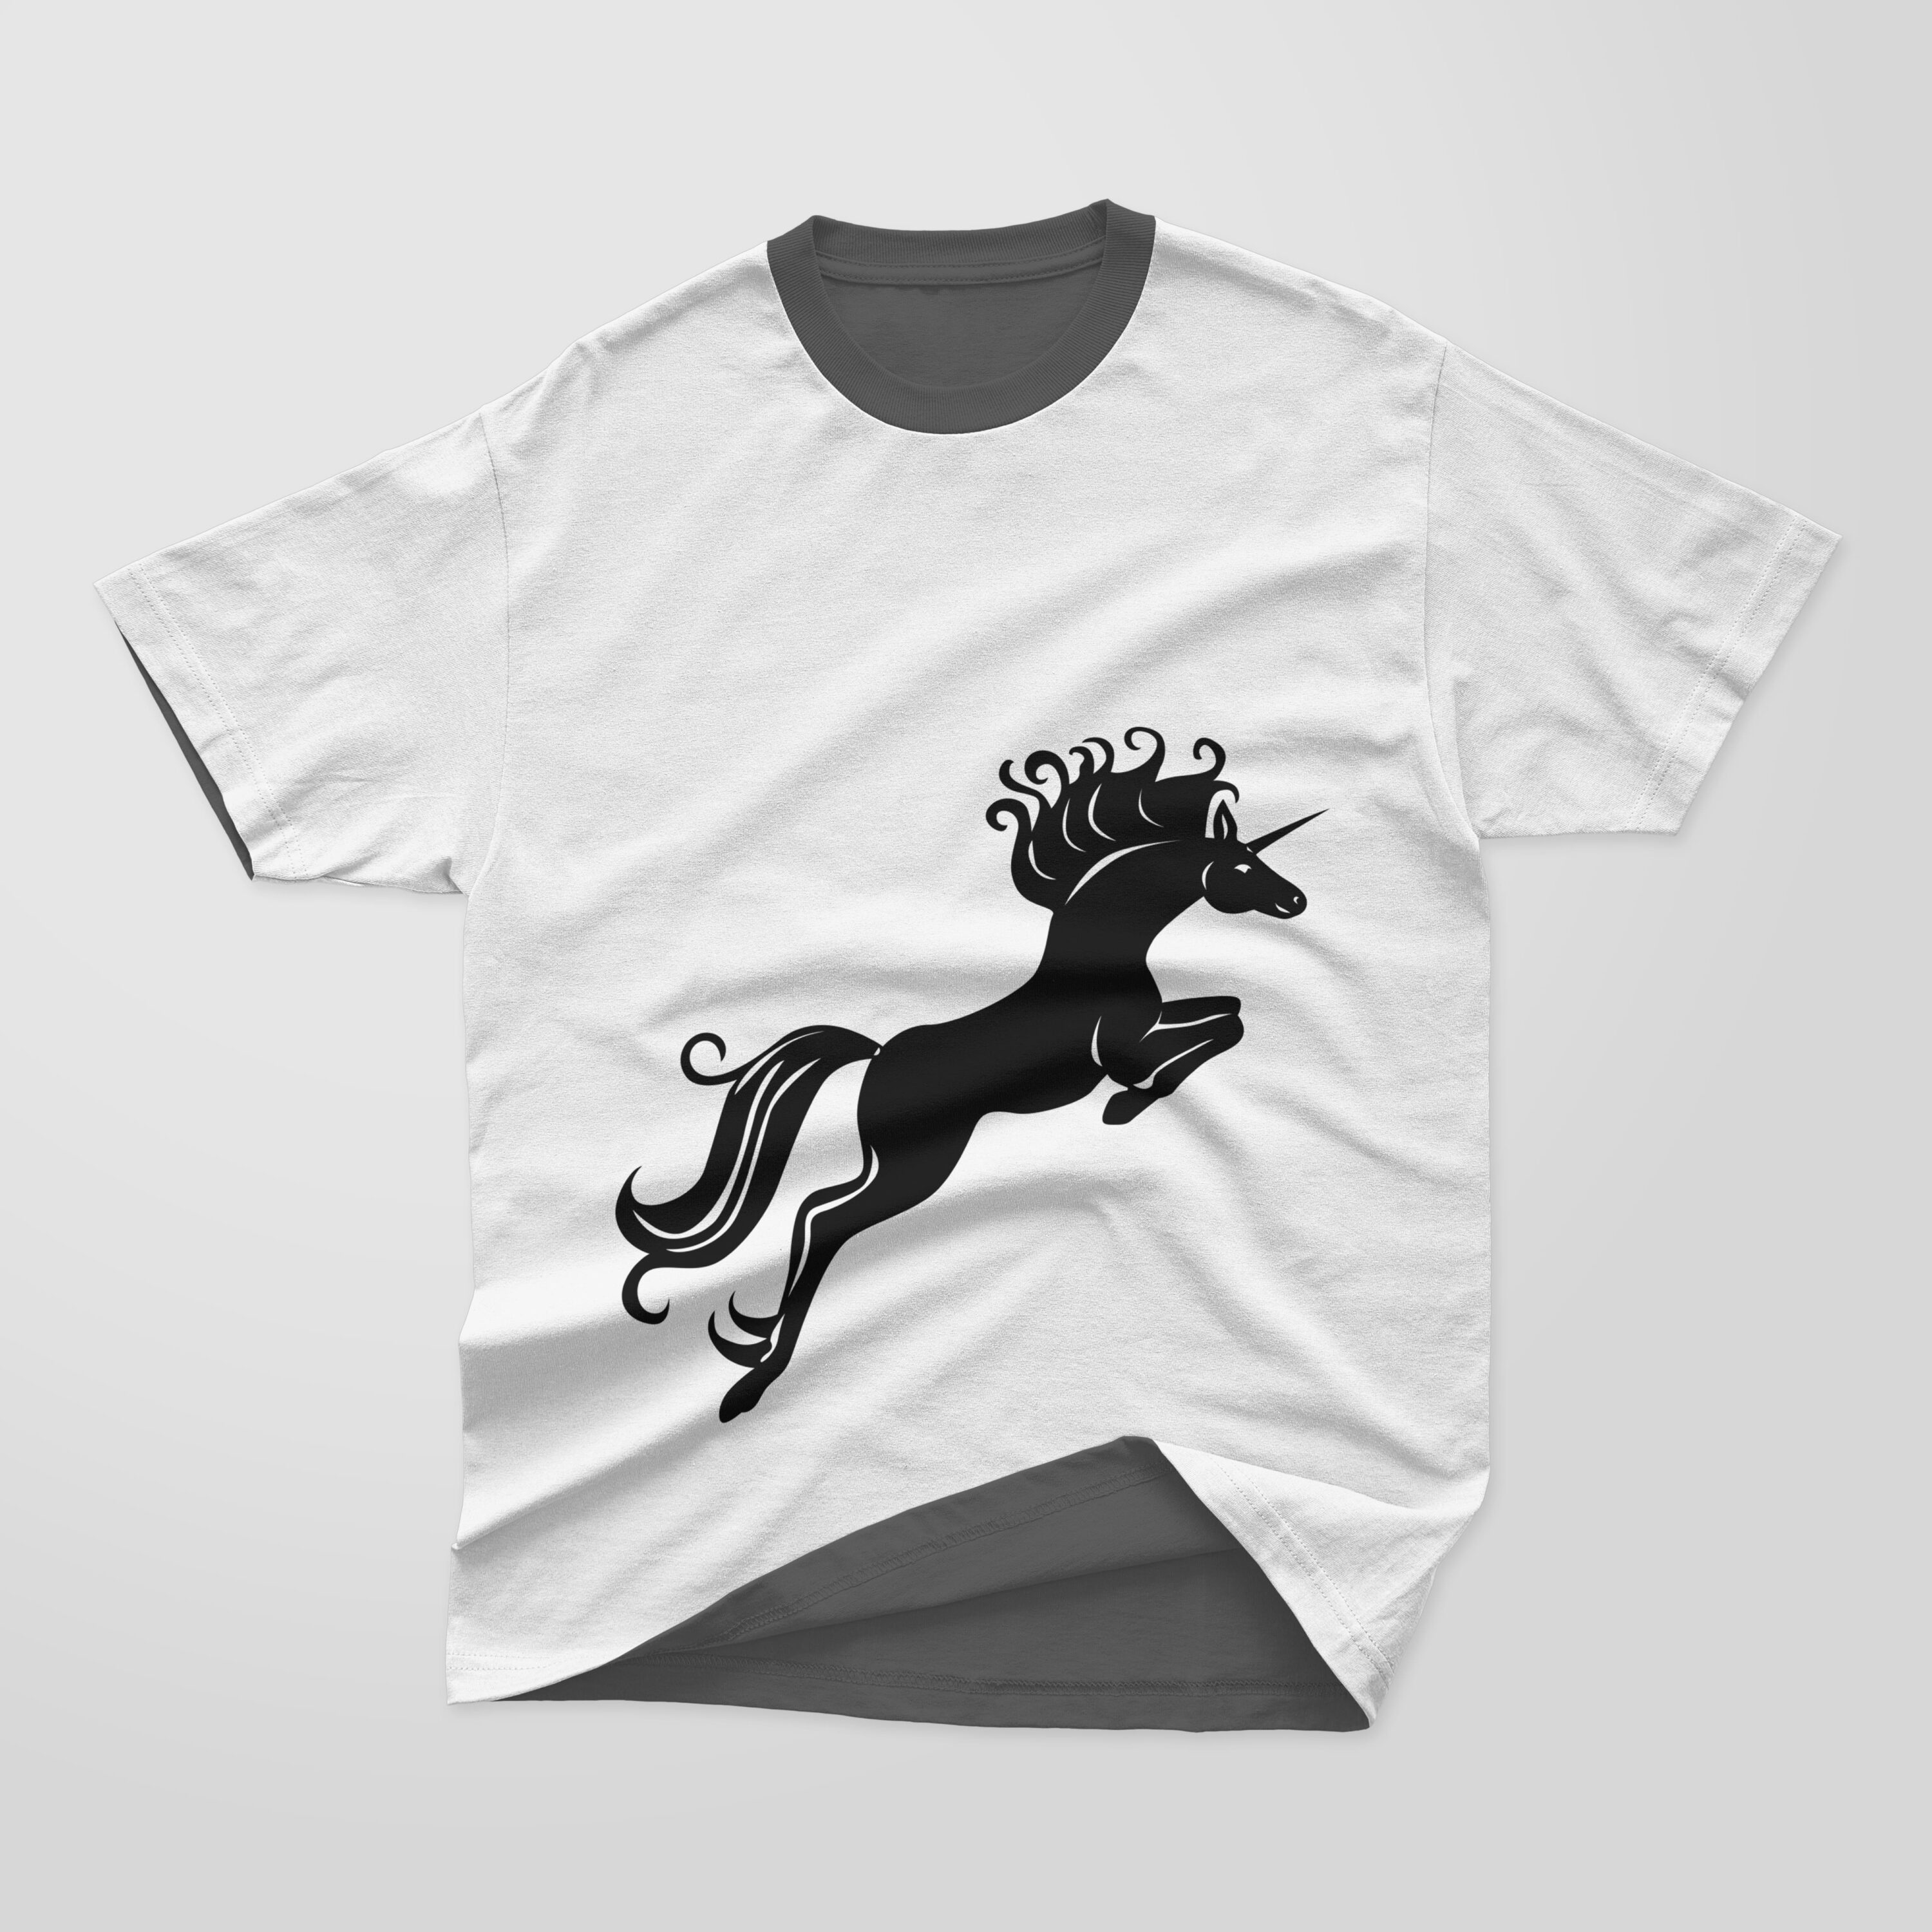 White and dark gray T-shirt with a dark gray collar and a black silhouette of a running unicorn on a gray background.